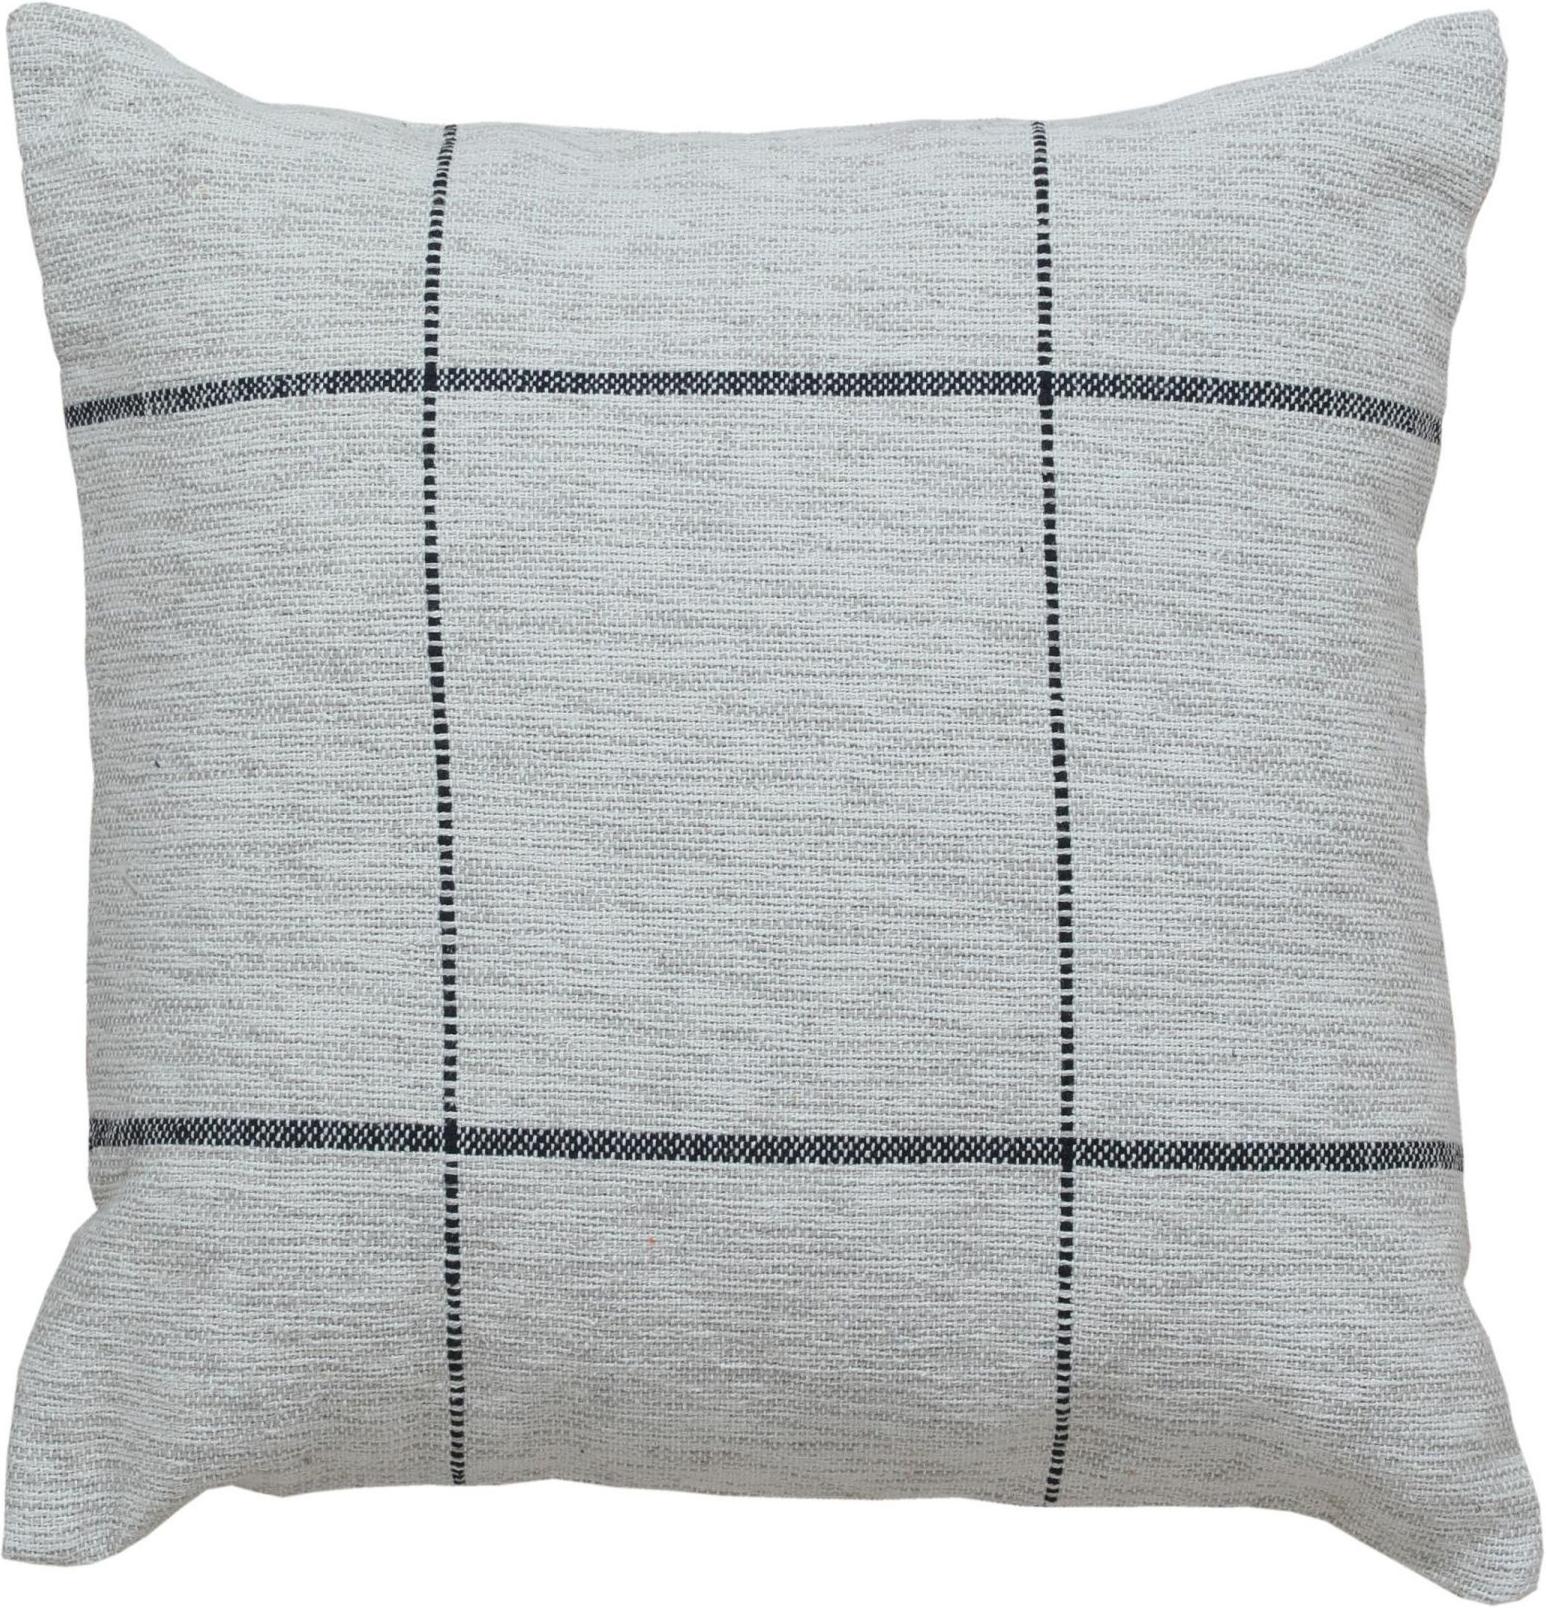 Indian Contemporary Wool and Cotton Pillow In Gray and Beige with Geometric Parttern For Sale